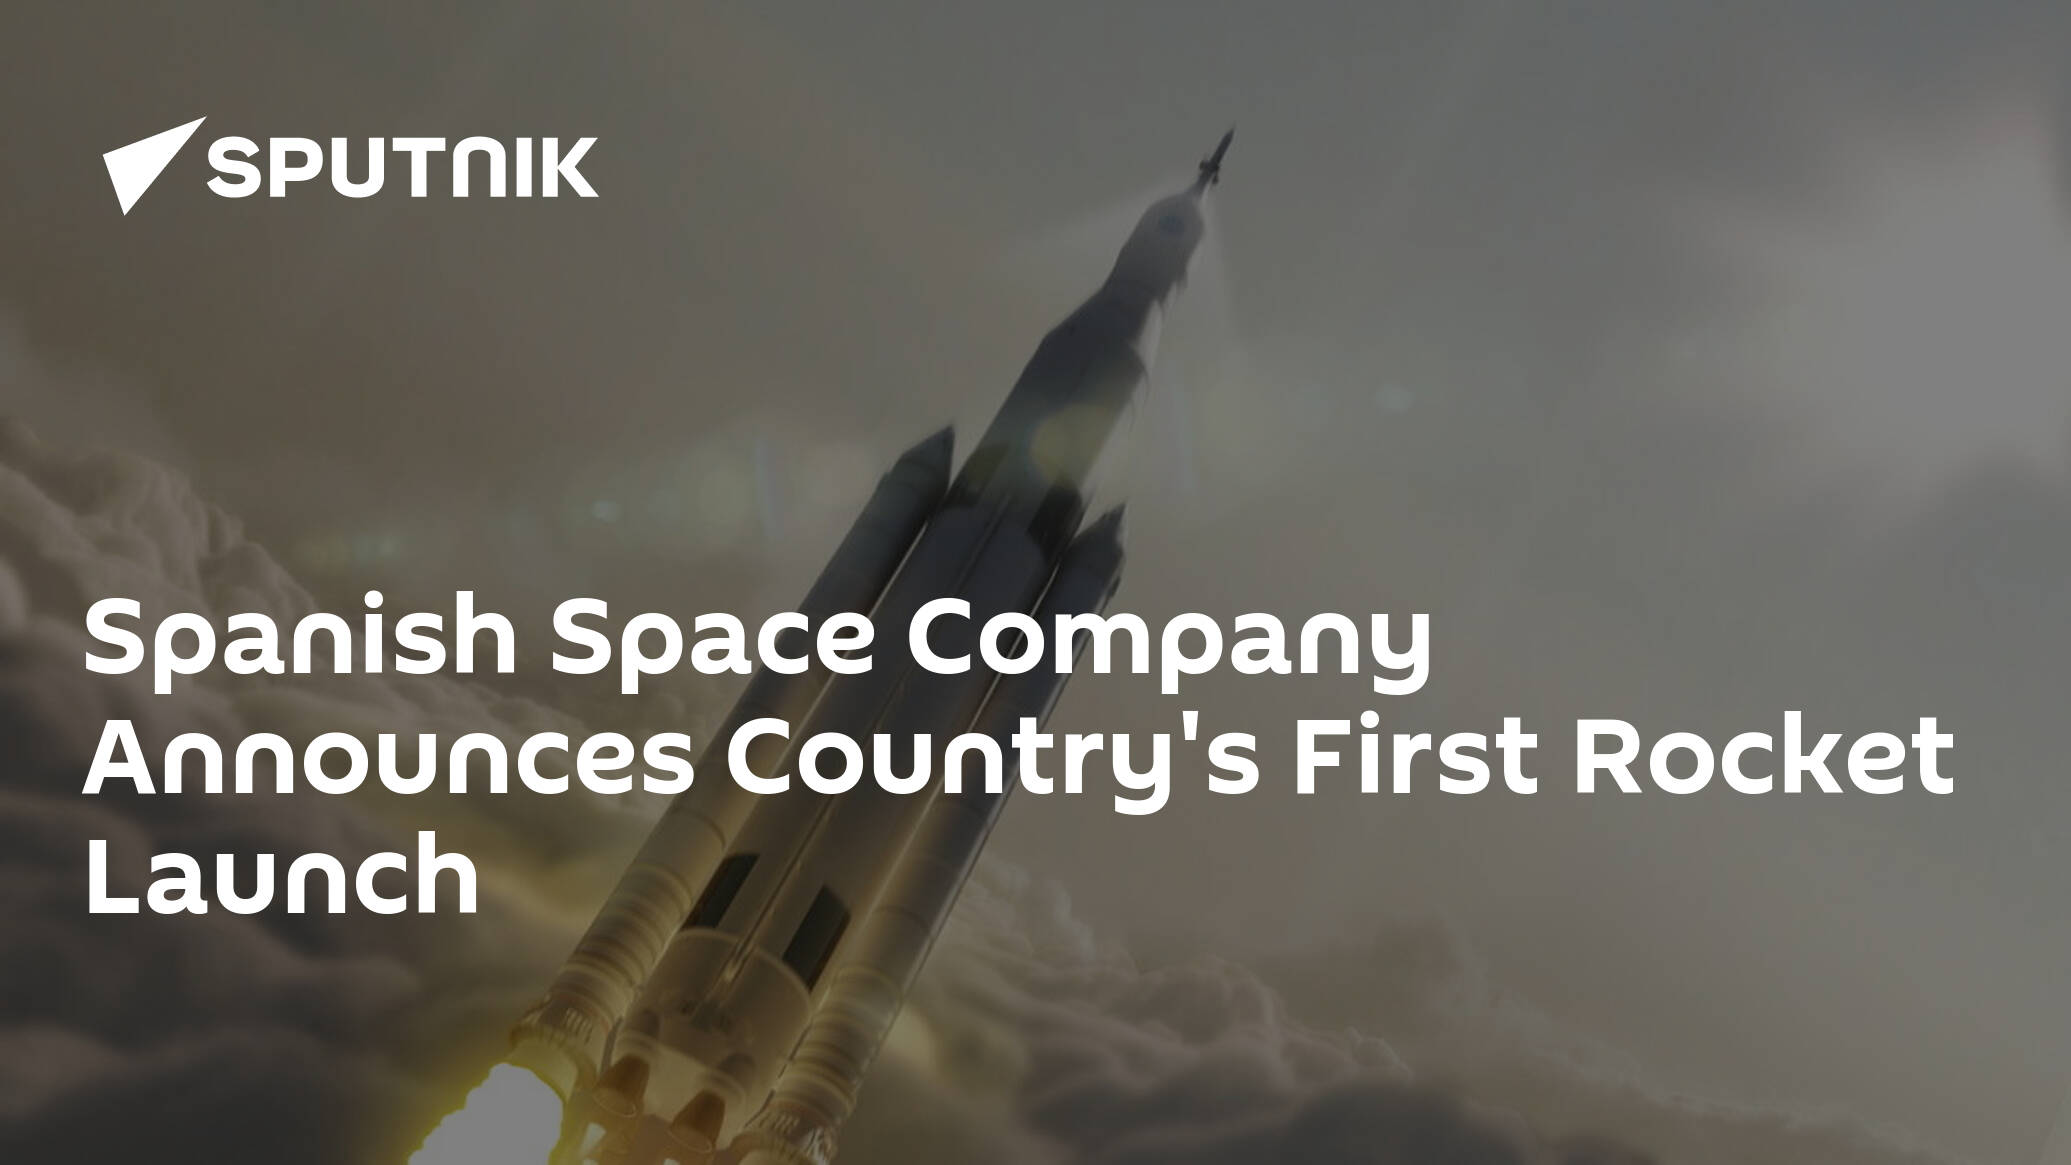 Spanish Space Company Announces Launch of Country's First Rocket